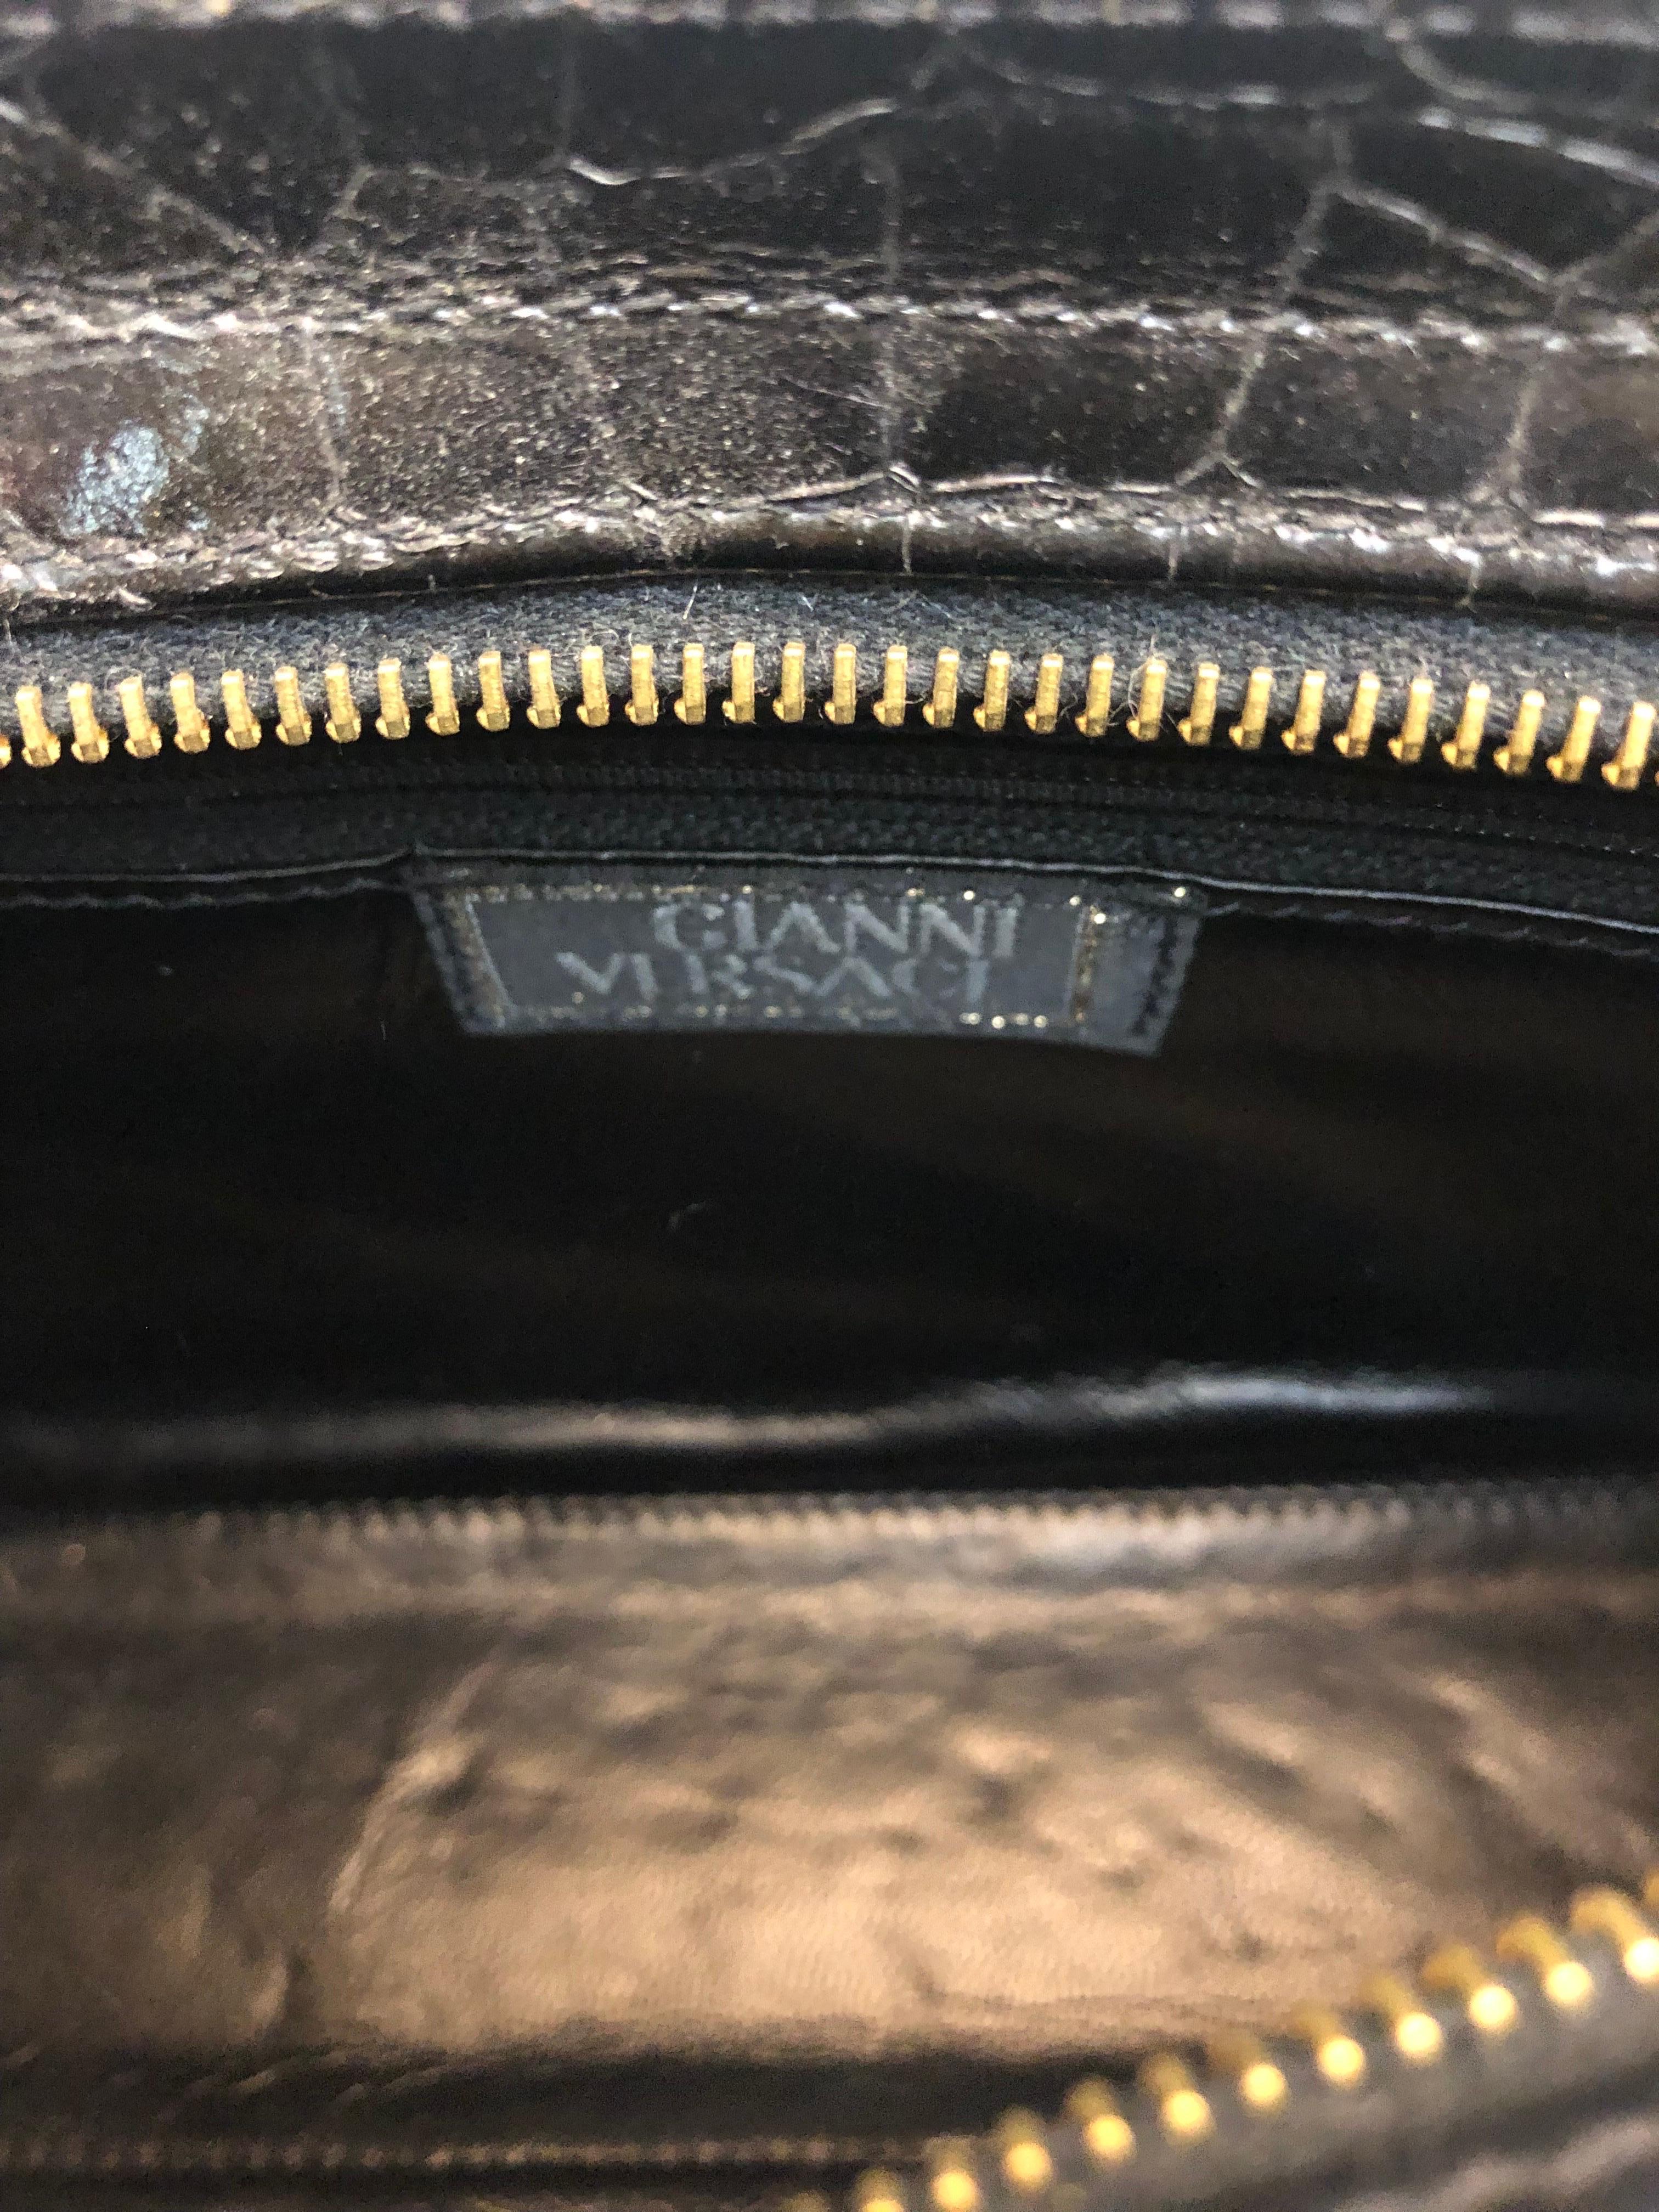 Gianni Versace Couture Black Medusa Chain Shoulder Bag In Excellent Condition For Sale In Sheung Wan, HK